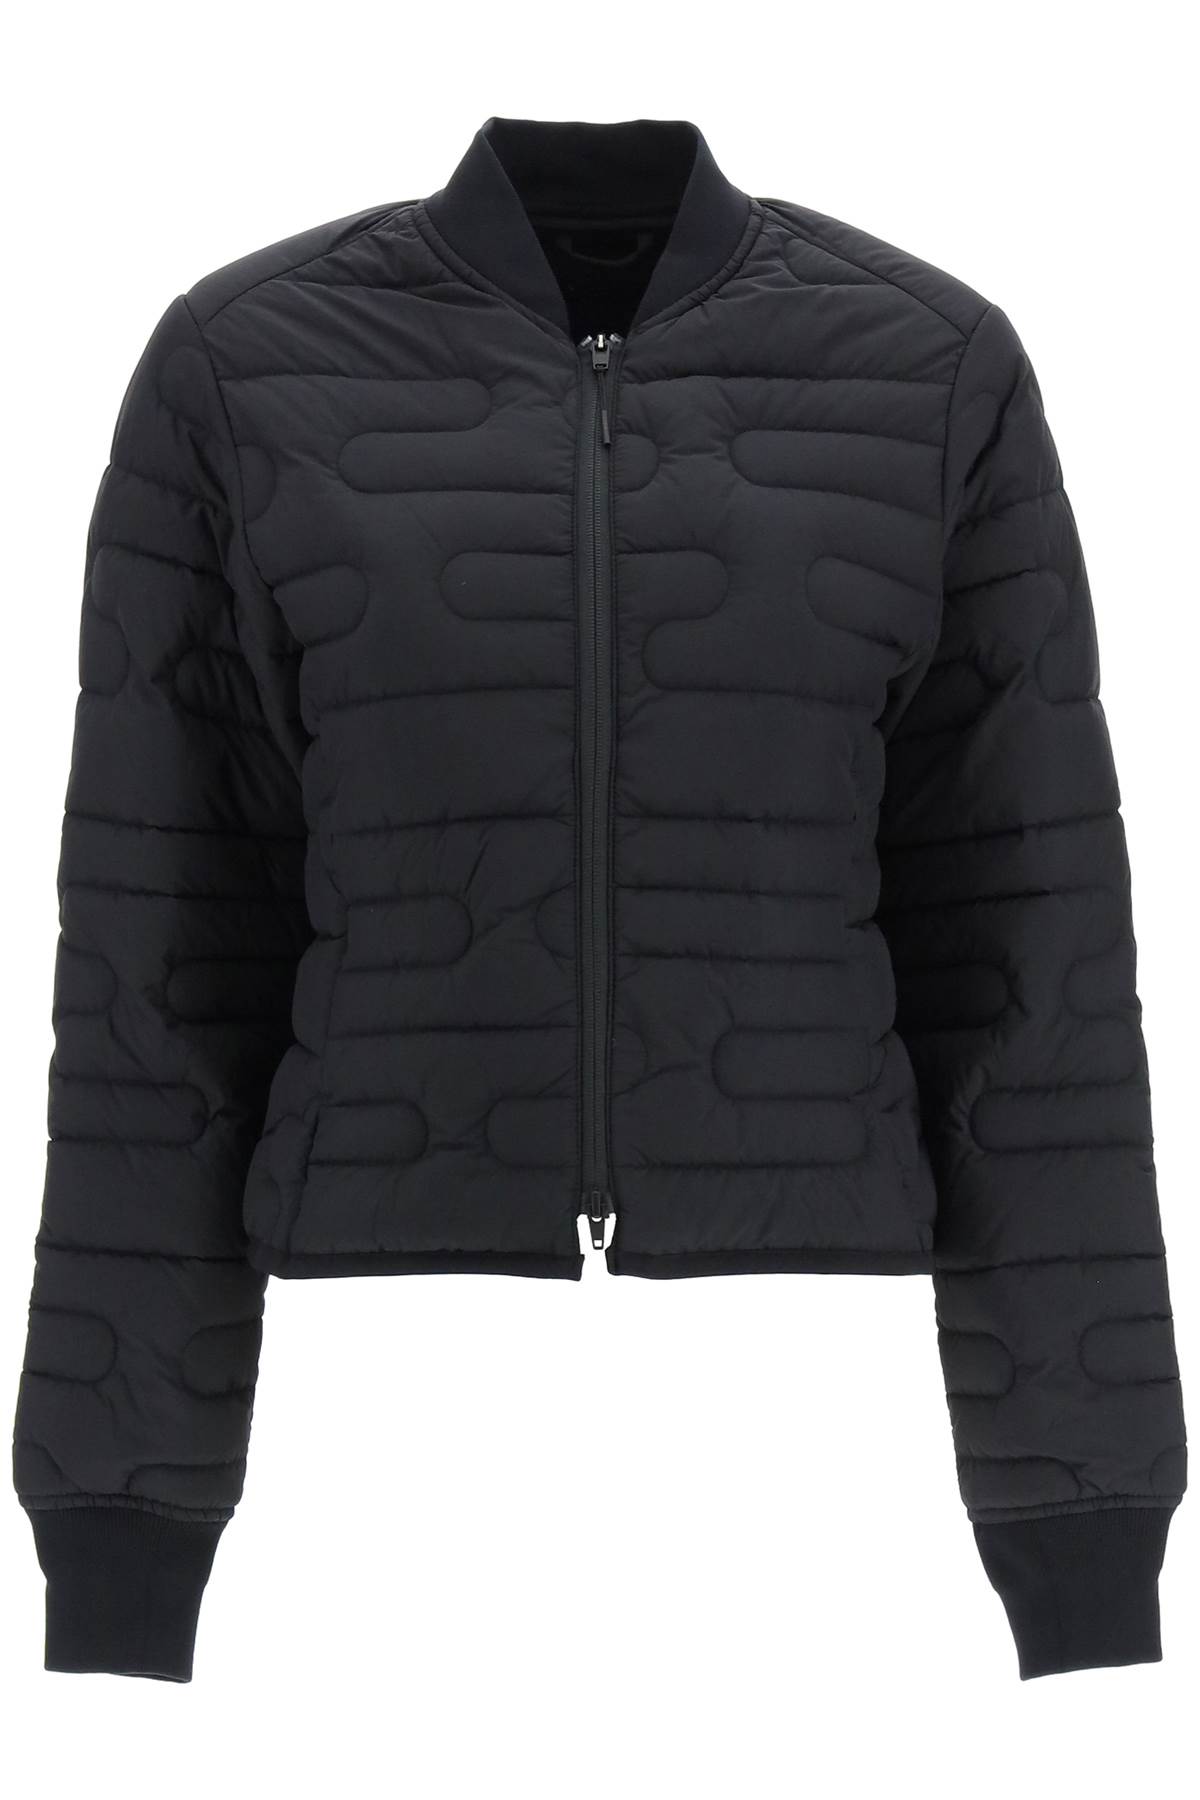 Y-3 Quilted Light Bomber Jacket